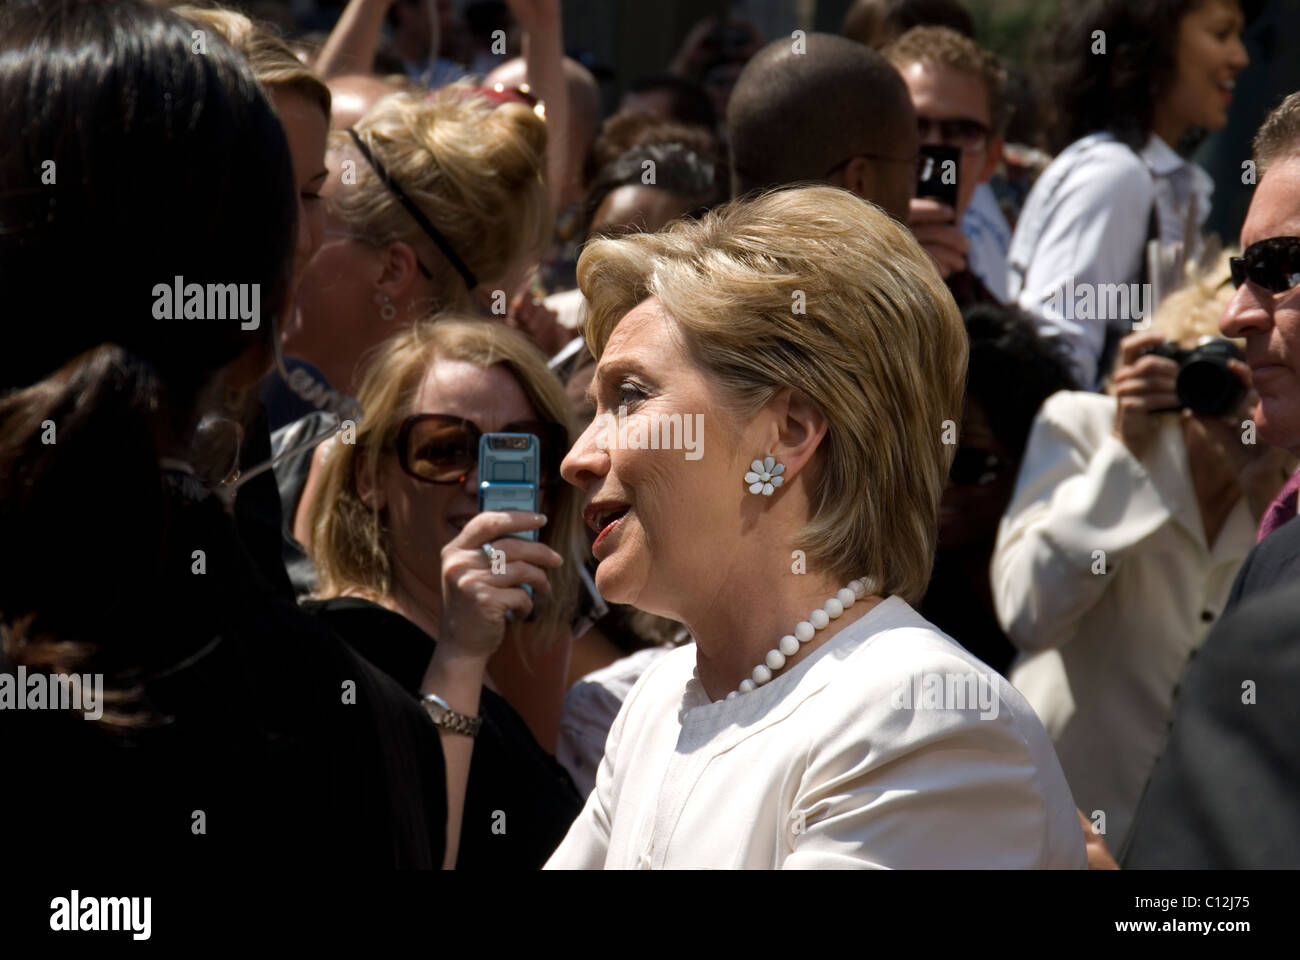 United States Secretary of State Hillary Clinton speaking to admirers Stock Photo